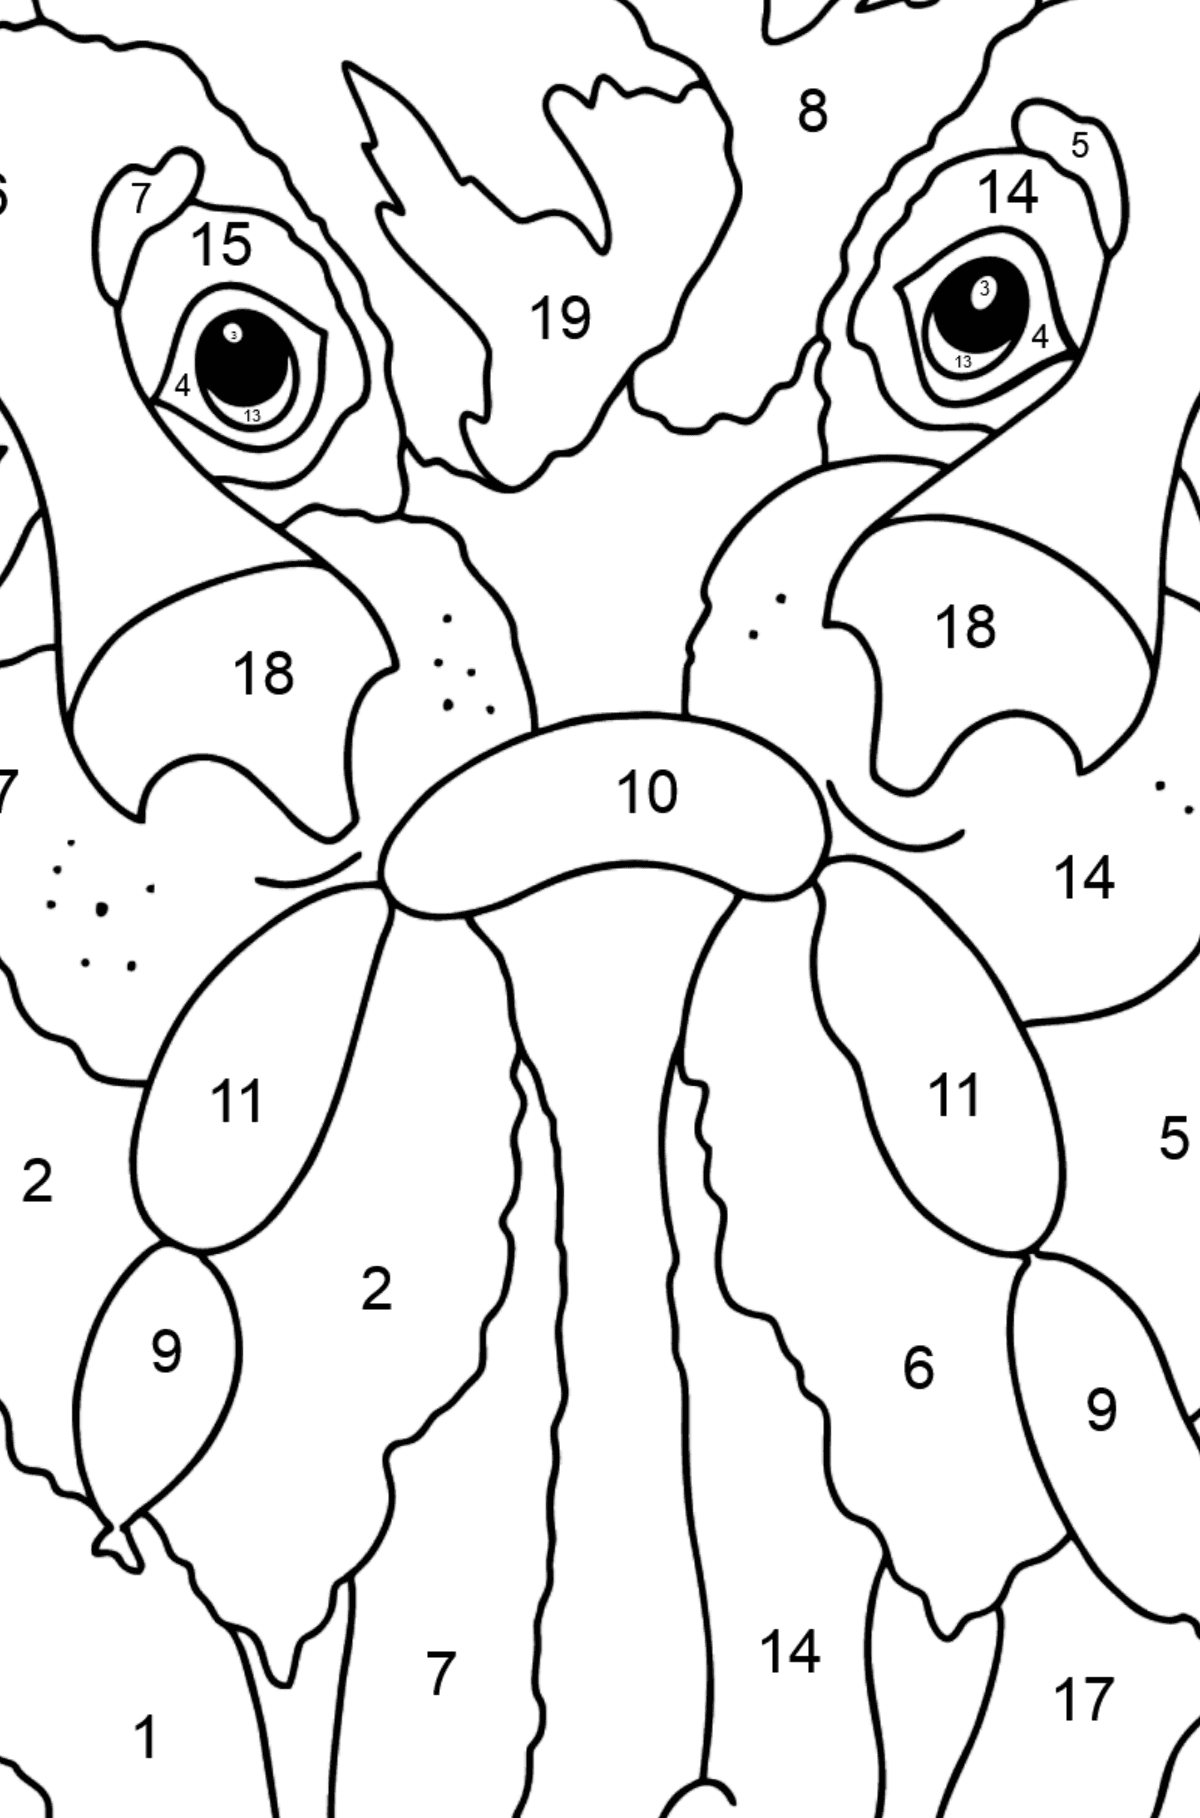 Coloring Page - Dogs Found Sausages - Coloring by Numbers for Kids